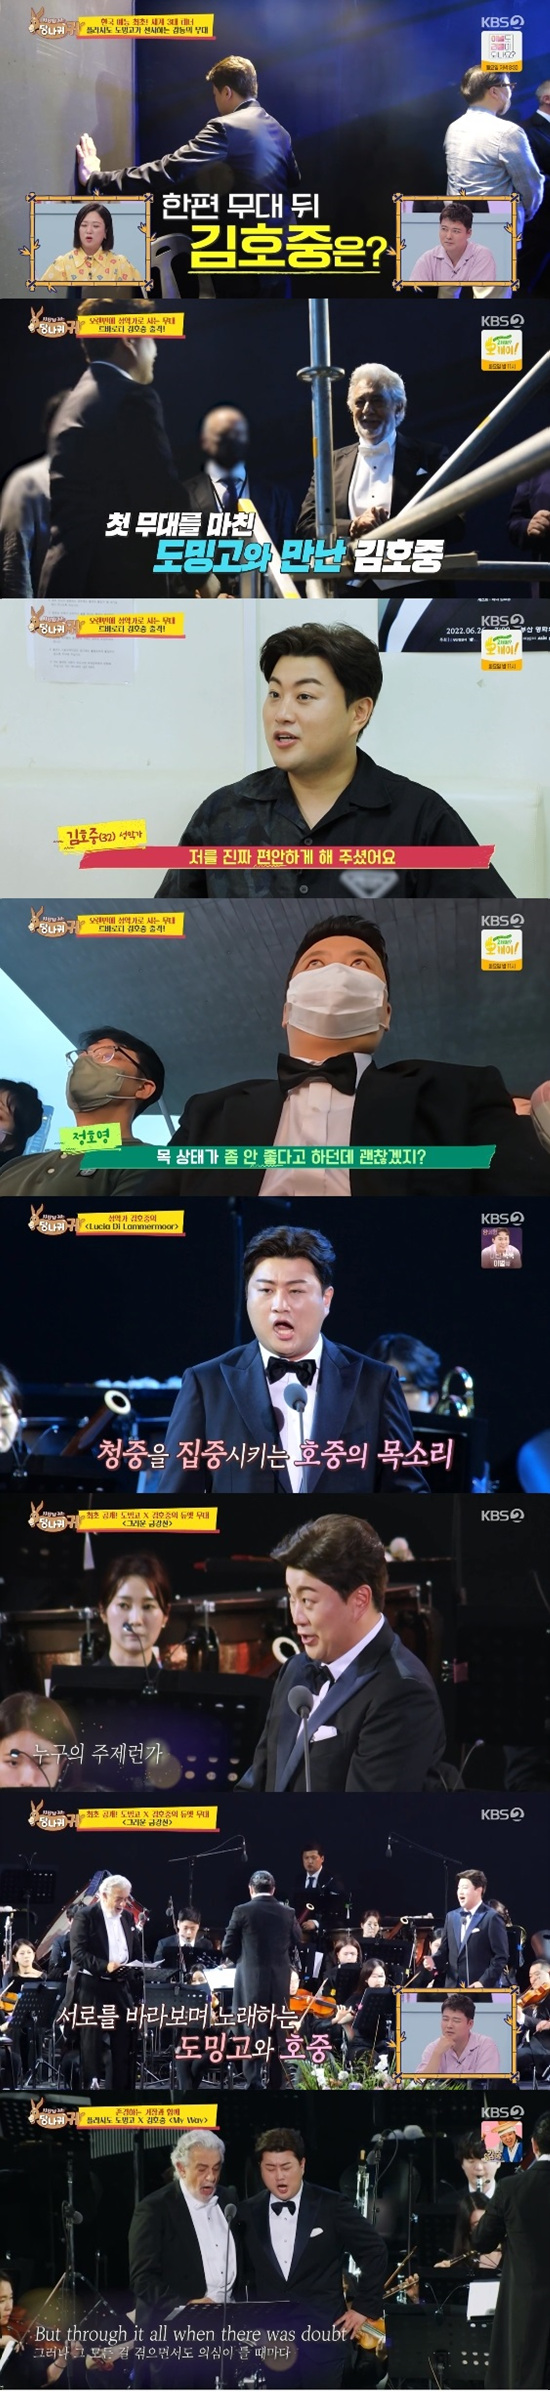 Kim Ho-joong has been in a tumultuous mood for the Duets stage against Placido Domingo.On KBS 2TV Boss in the Mirror broadcasted on the 31st, Kim Ho-joong was on the stage with Placido Domingo and Duets.Kim Ho-joong was embarrassed by the trouble of the stage costume when he came into the waiting room without rehearsing properly.Kim Ho-joongs friend Lee Jae-myung took off his shirt and said how this was all about.Kim Ho-joong prepared the stage in Lee Jae-myungs shirt; Placido Domingo ran into Kim Ho-joong on his way down from the first stage.Kim Ho-joong was looking at the wall alone and was quietly decapitating.Placido Domingo was not spared encouragement after seeing Kim Ho-joong nervous: Domingo teacher made me comfortable: Dont worry.He said, Its okay.Jeong Ho-young waited for Kim Ho-joongs stage in the audience and worried, I said my neck was a little bad, but it would be okay?Fortunately, Kim Ho-joong sang his first solo song, wide-eyed, shoulder-opened, and high-pitched. Lee Jae-myung said, I made a little time.It was all a shame, he applauded Kim Ho-joong.Kim Ho-joong also successfully completed the second solo stage; Lee Jae-myung said the high-pitched went well.Jeong Ho-young also said, It was almost tears, it was so cool.Kim Ho-joong prepared the Duets stage with Placido Domingo after finishing the solo stage.Kim Ho-joong and Placido Domingo sang Nostalgic Mount Kumgang as the first song on the Duets stage.Kim Ho-joong said, I thought you were a really happy person because you were able to deliver this music with Domingo.Kim Ho-joong said in the studio, The reason why I was able to finish the performance really well and the reason why I could change every stage in the future was because I was singing and Domingo asked me to look at my eyes a lot.I could follow you, and you could follow me. Dont worry, the performance has already begun.I believed that you told me, and when I followed you, I was at the end of My way. Place also said that thanks to Domingos advice, I was able to finish the stage well.Kim Ho-joong said, I had a lot of variables such as bad neck condition on the day and not being able to rehearse properly, but I want to talk about it if I have a heartfelt mind.Kim Ho-joong said, If you do not know the stage, it seems that such a hard time that I do not know comes out. It was a very happy time.Photo: KBS Broadcasting Screen